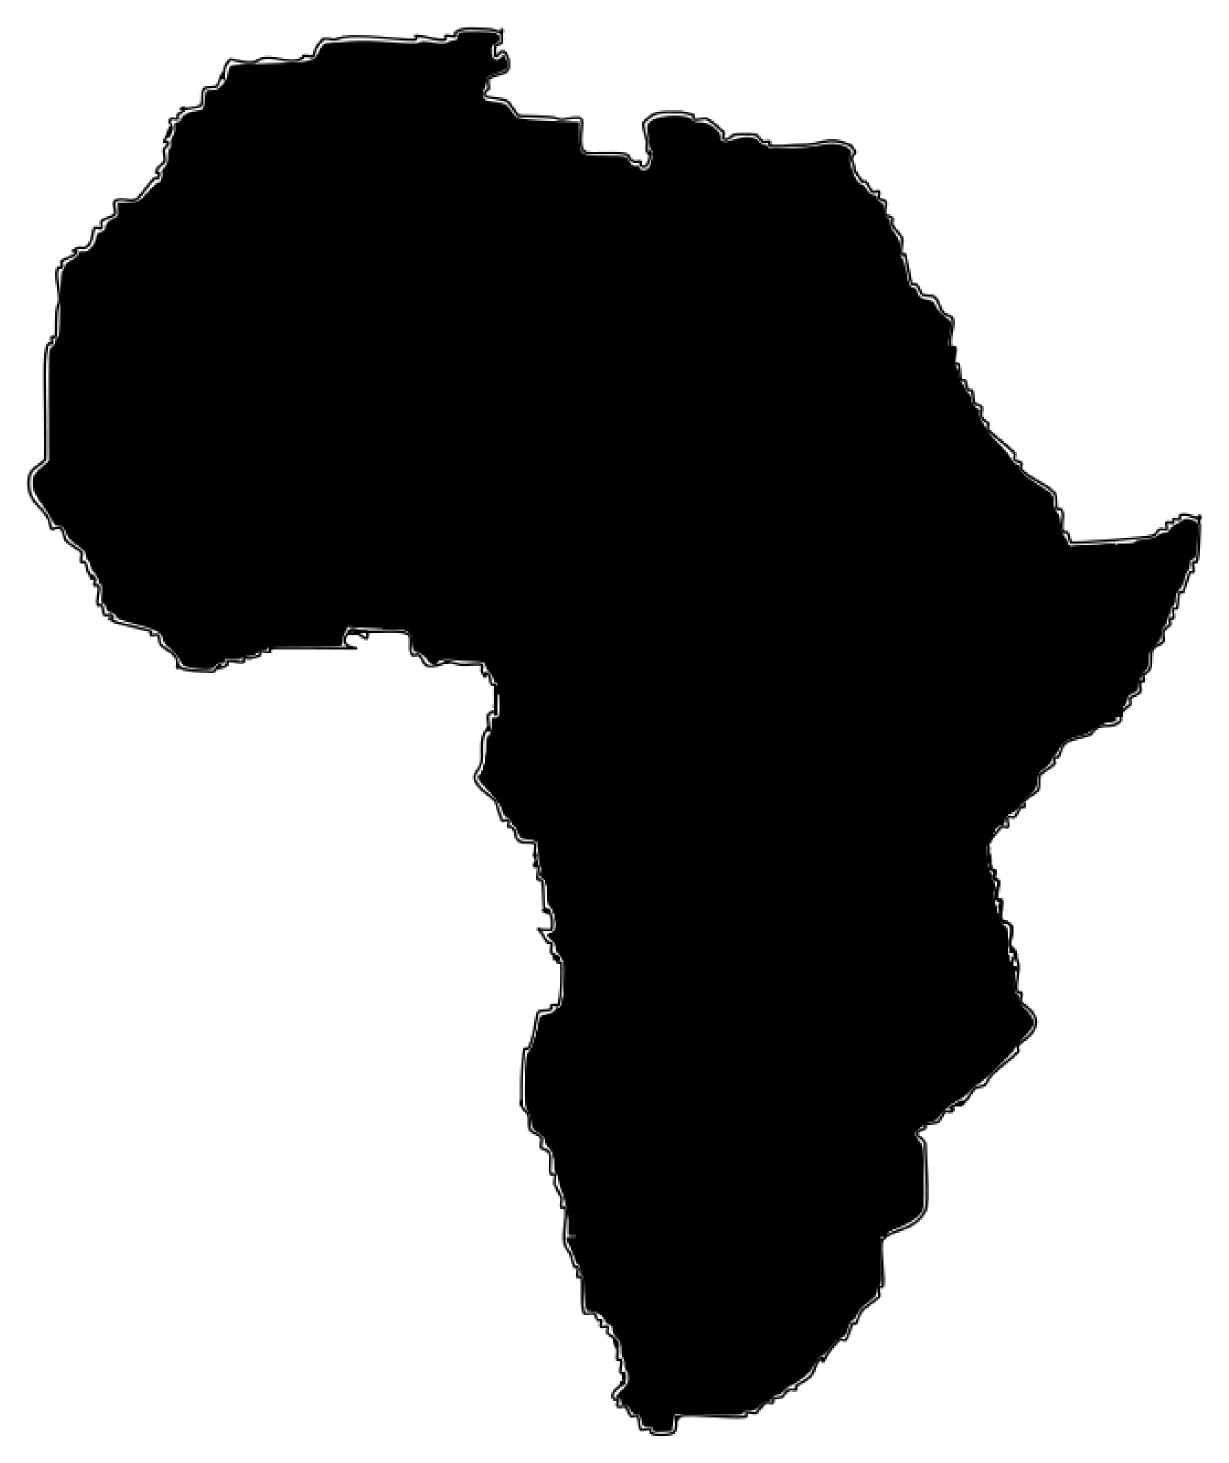 south africa clip art free - photo #4